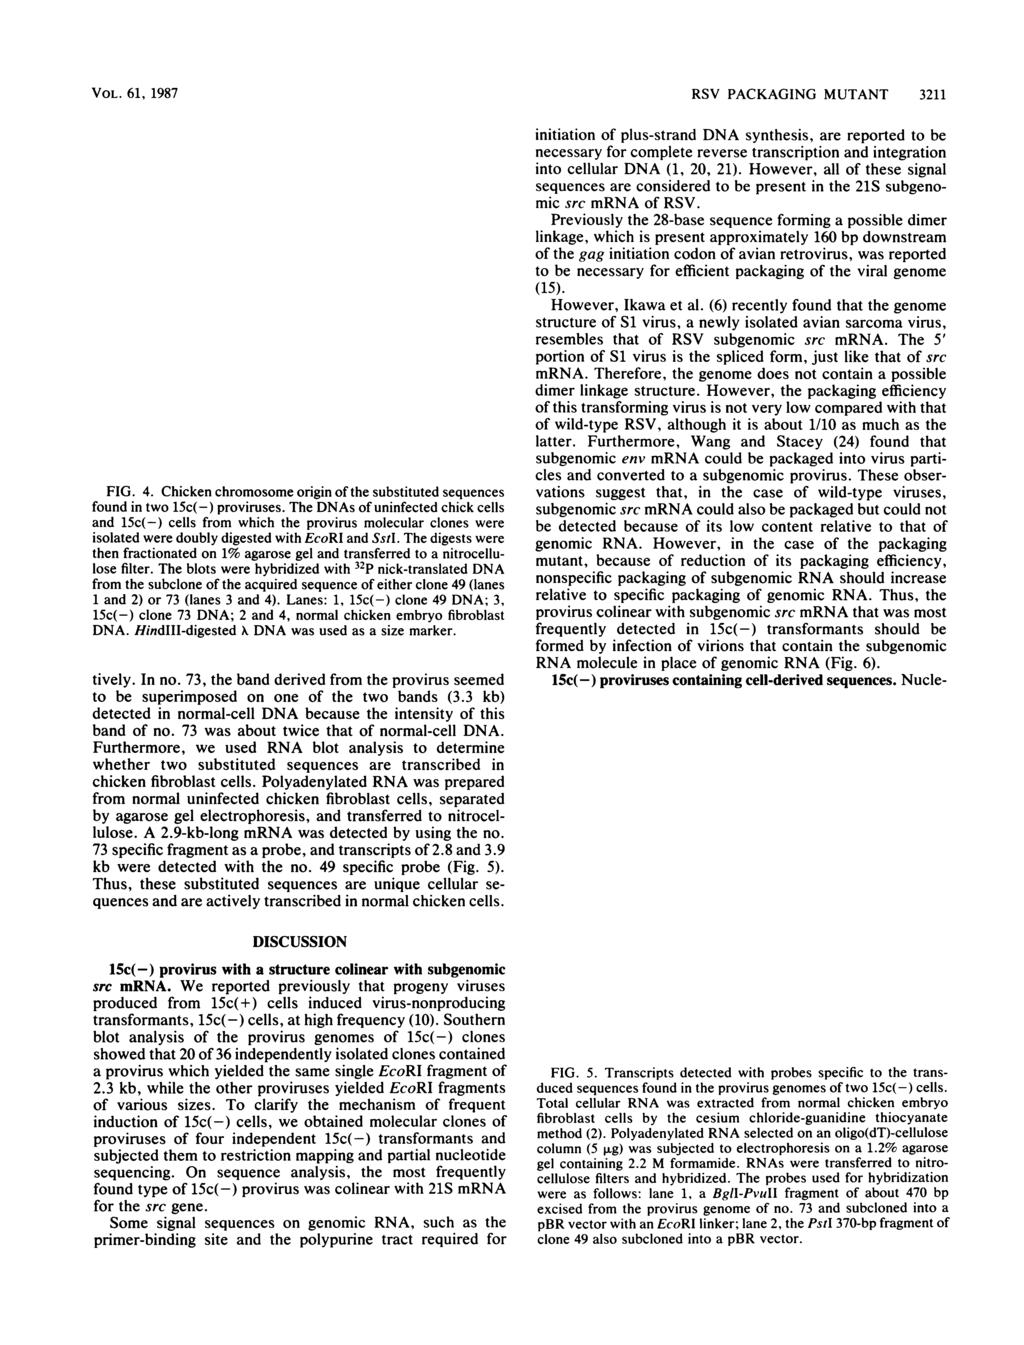 VOL. 61, 1987 1 2 4*- - _ - 9.4kb - 6.6 - - 4.4- - 23-2.0-3 4 I4 - _- FIG. 4. Chicken chromosome origin of the substituted sequences found in two 15c(-) proviruses.